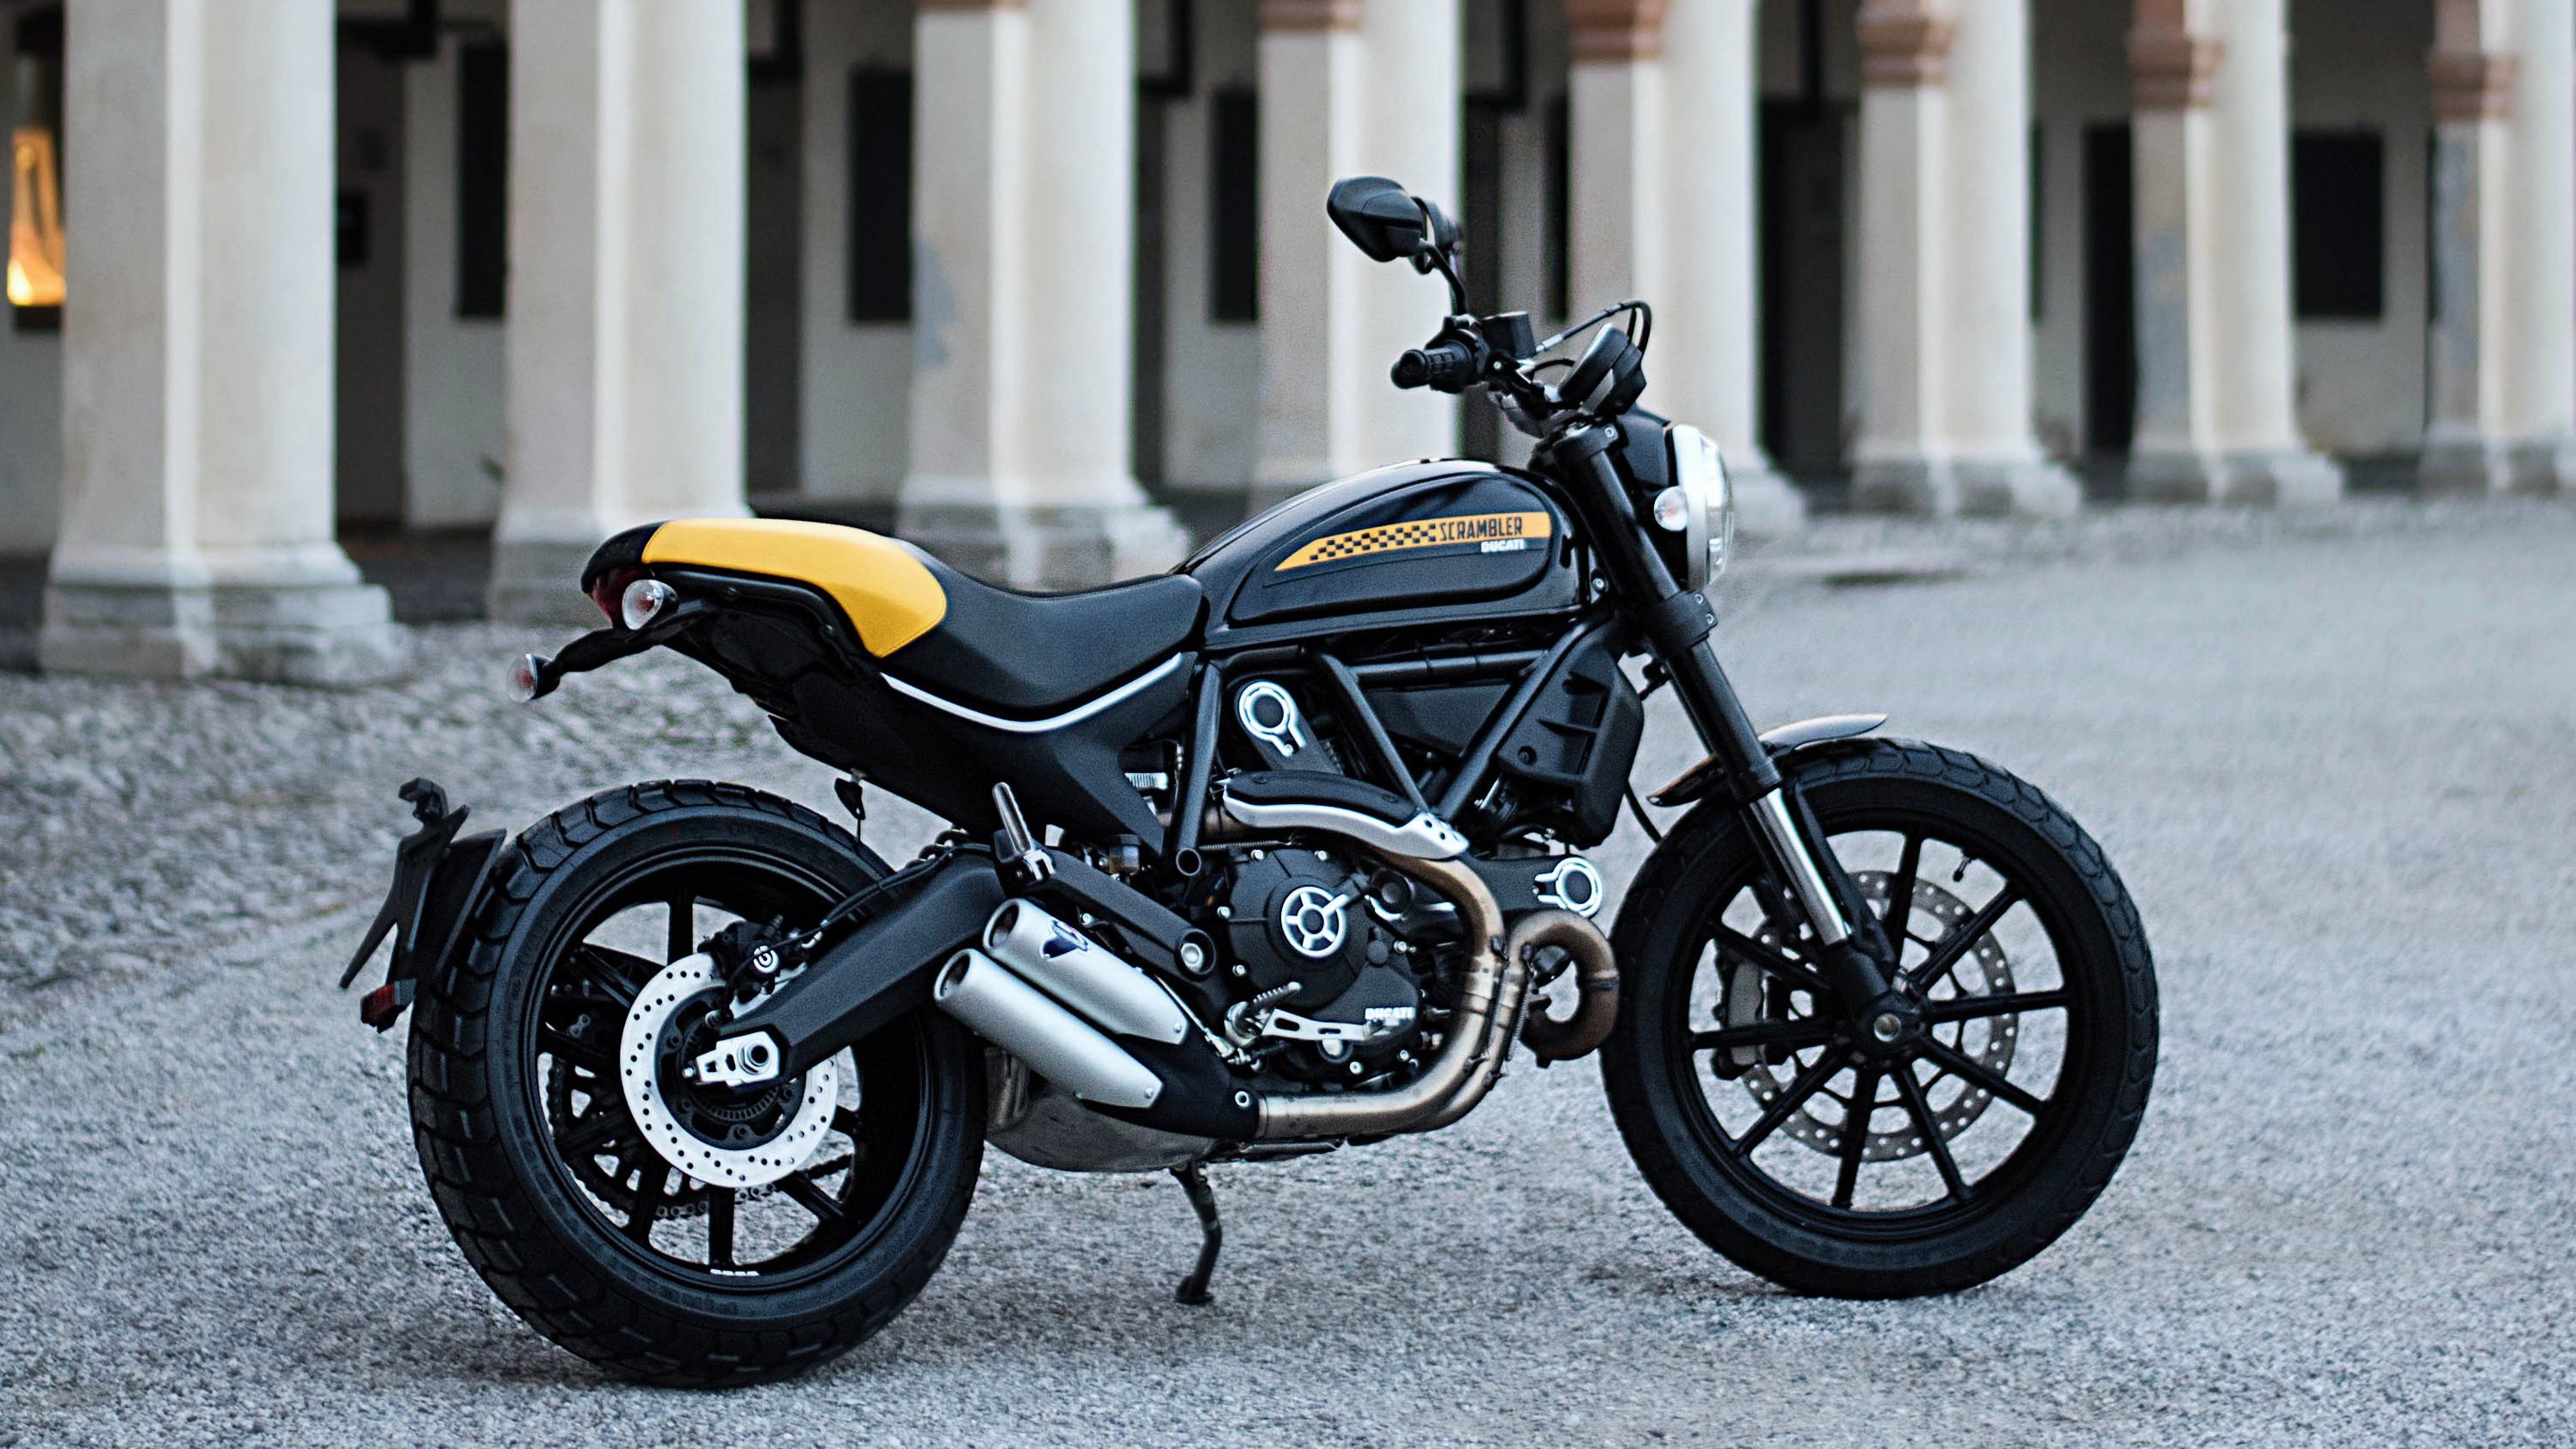 2018 Ducati Scrambler Full Throttle Pictures, Photos, - Royal Enfield Classic 350 Abs , HD Wallpaper & Backgrounds